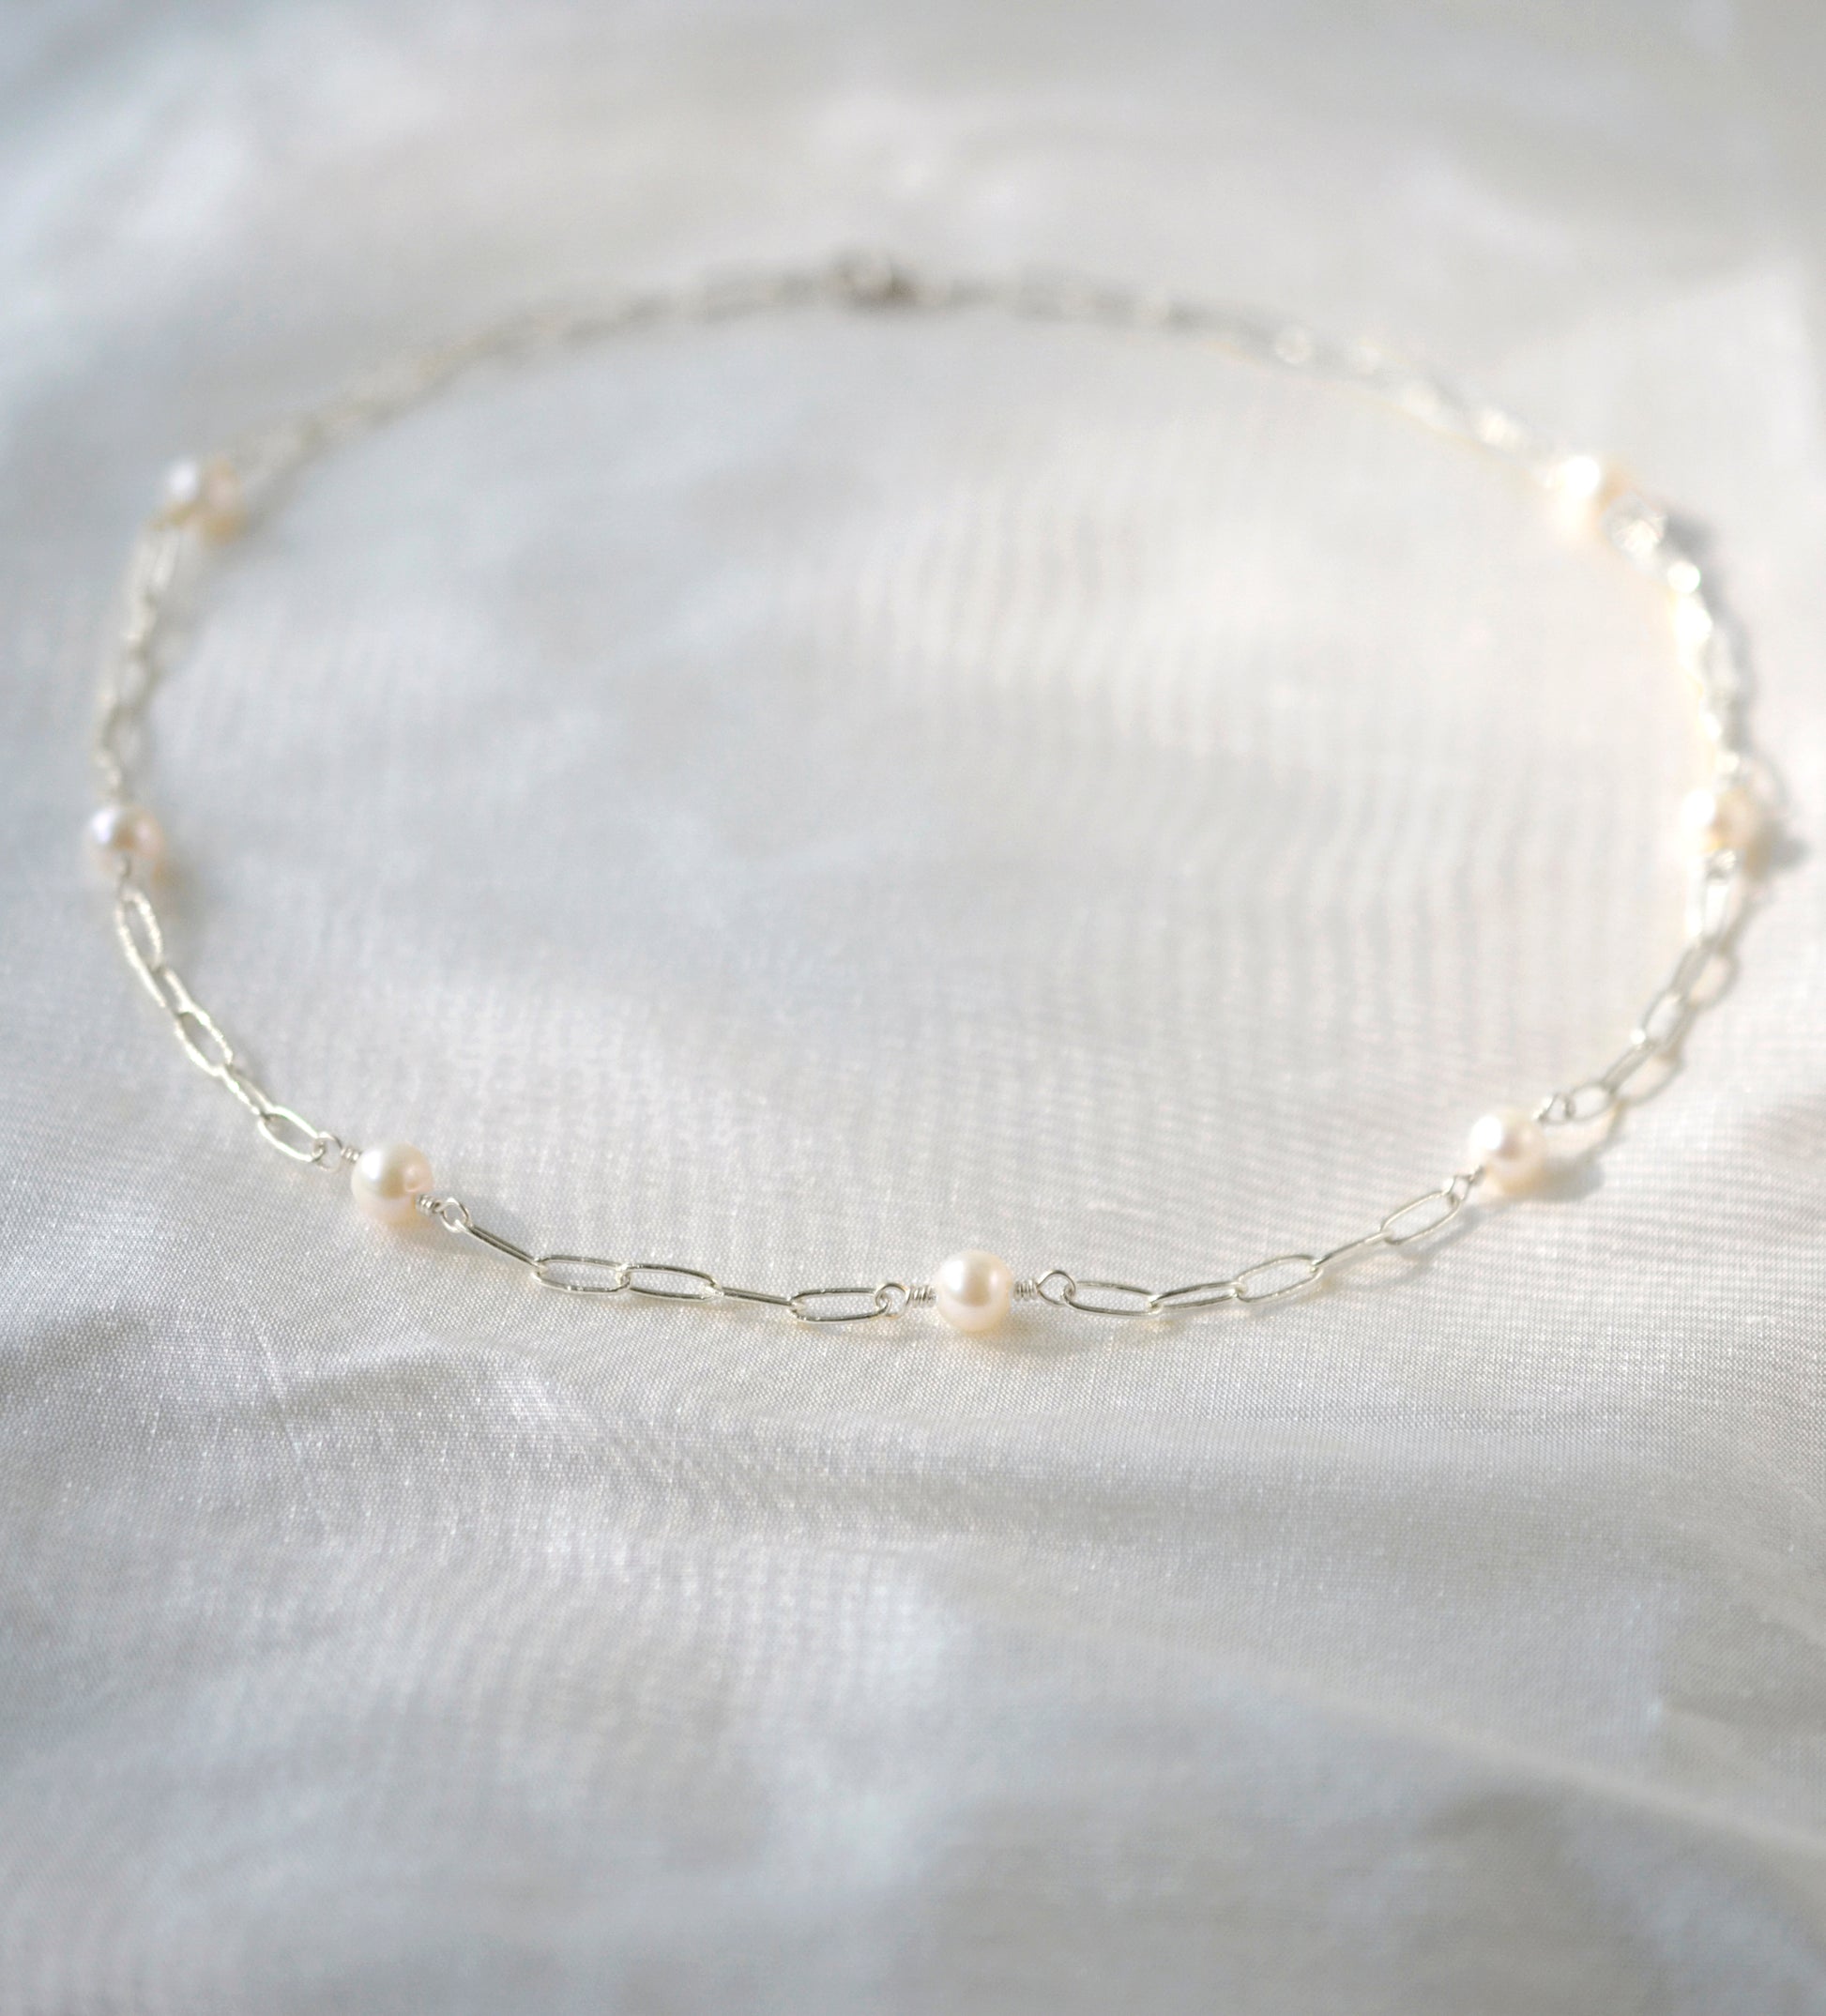 Seven white freshwater pearls set onto a silver paperclip style chain.